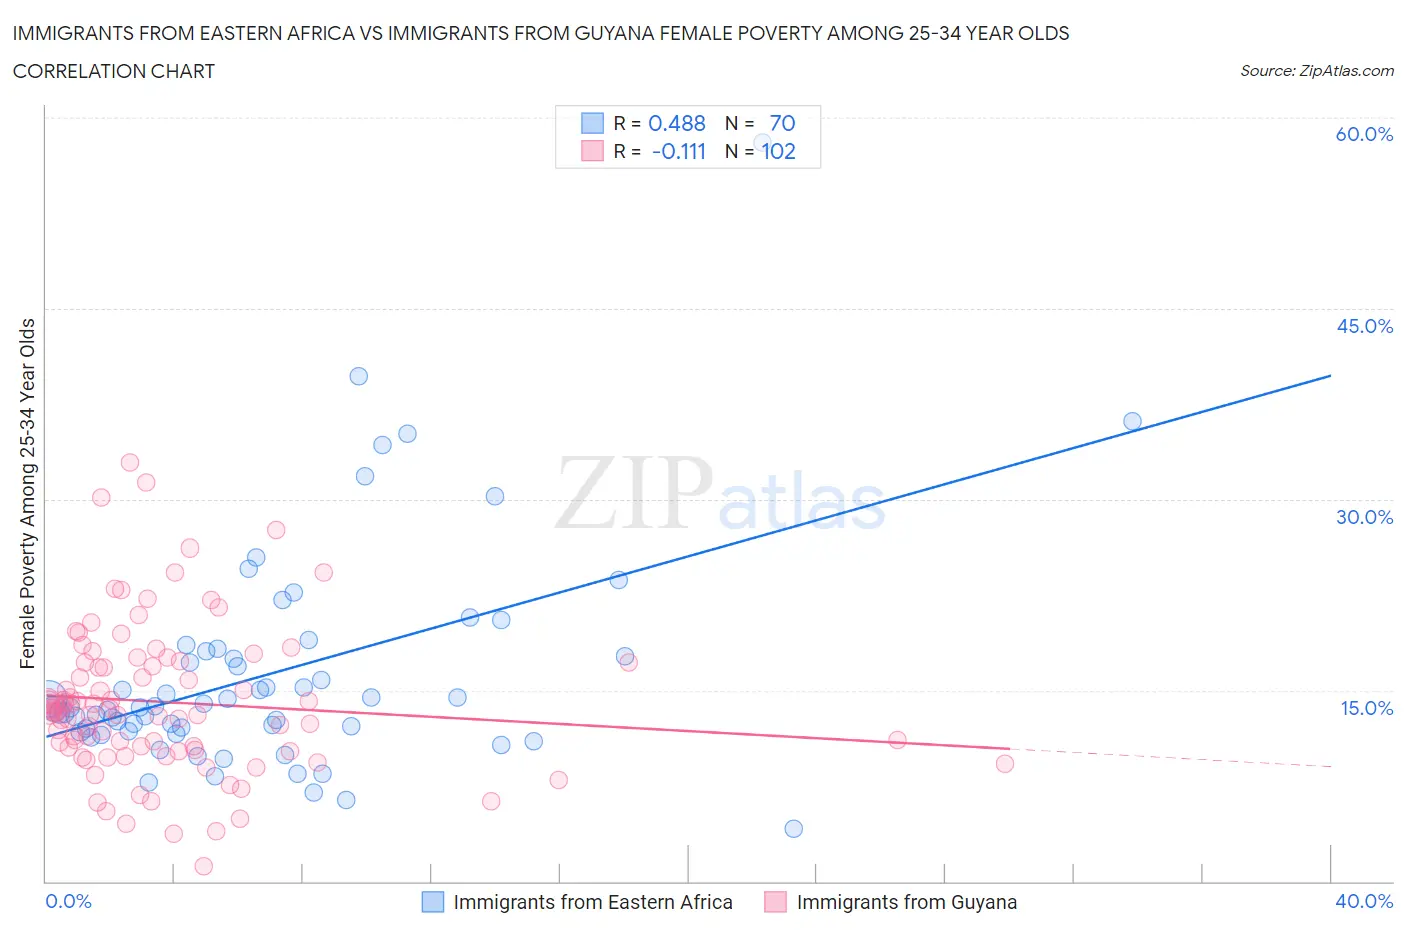 Immigrants from Eastern Africa vs Immigrants from Guyana Female Poverty Among 25-34 Year Olds